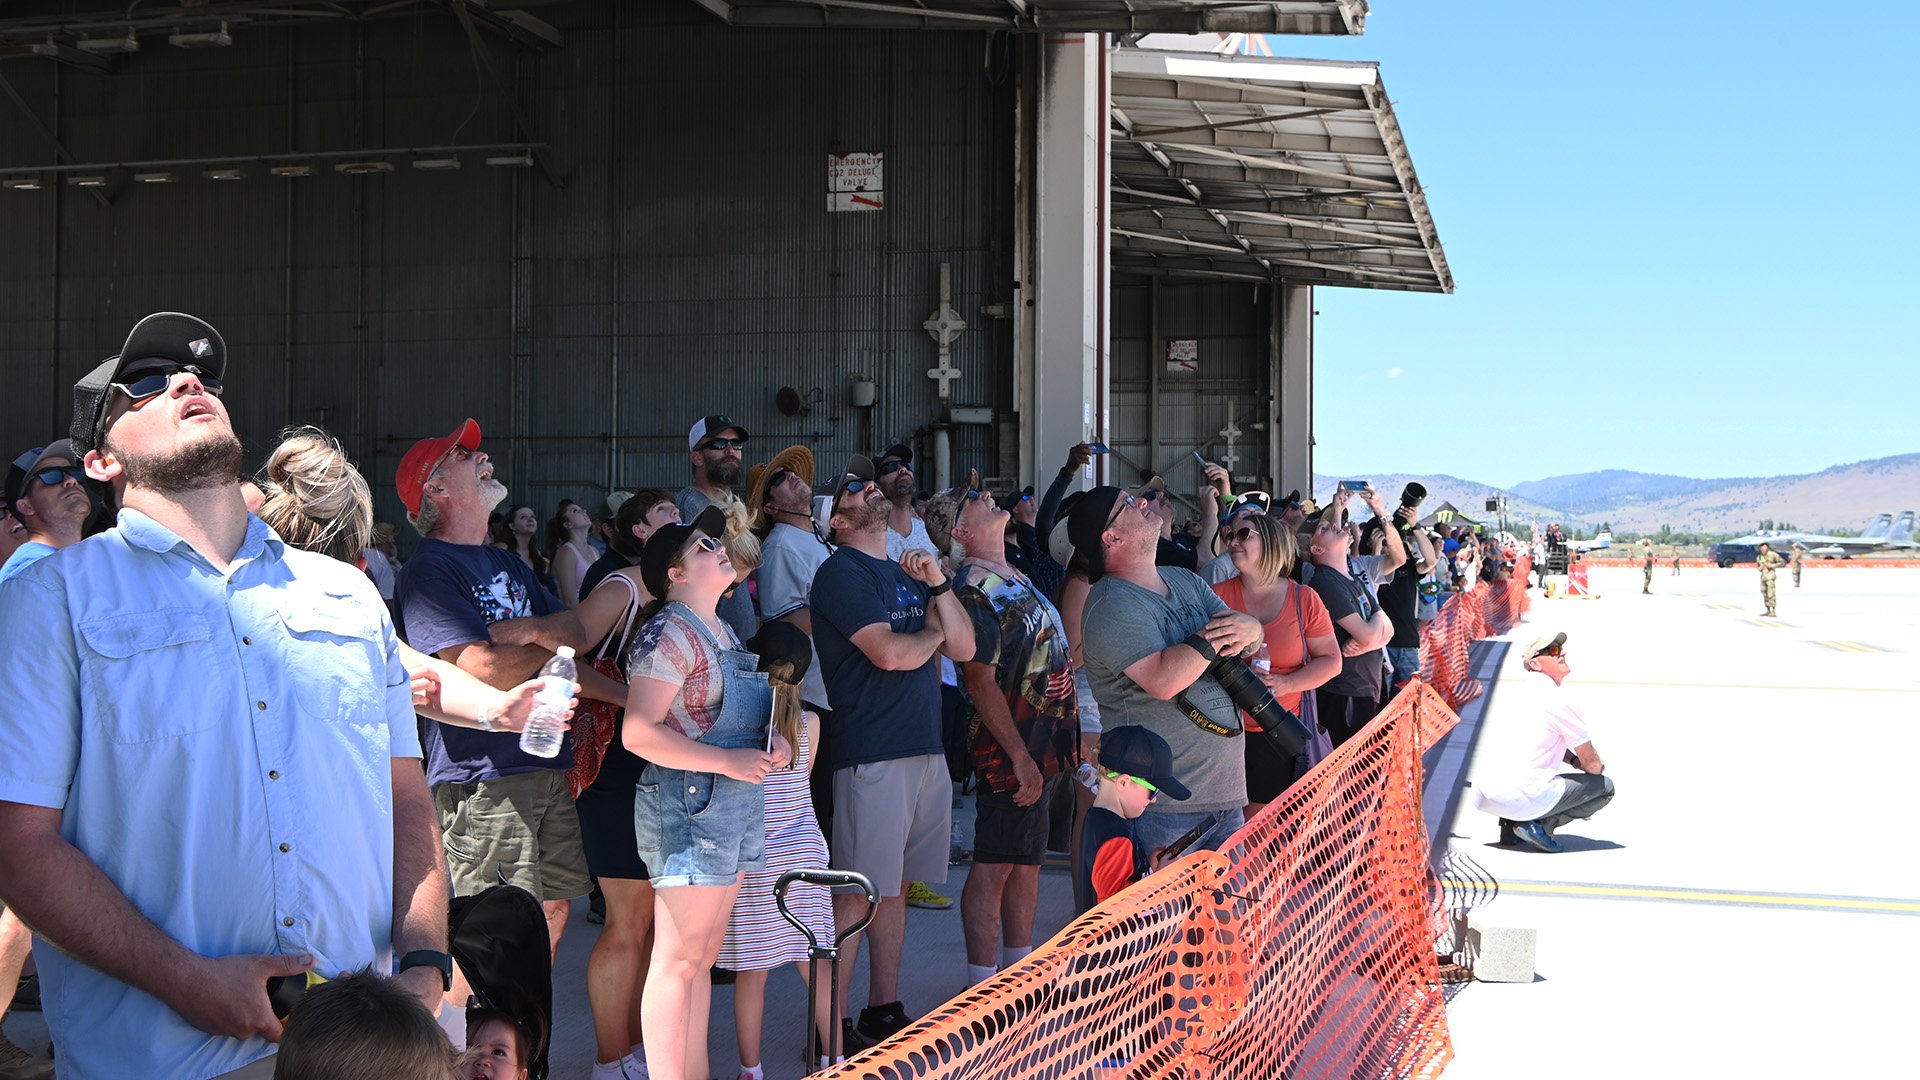  Visiting community members watch aerial demonstrations during the Sentry Eagle Open House June 25, 2022 at Kingsley Field in Klamath Falls, Ore. The open house provided an opportunity for the 173rd Fighter Wing to open the base to the community and 